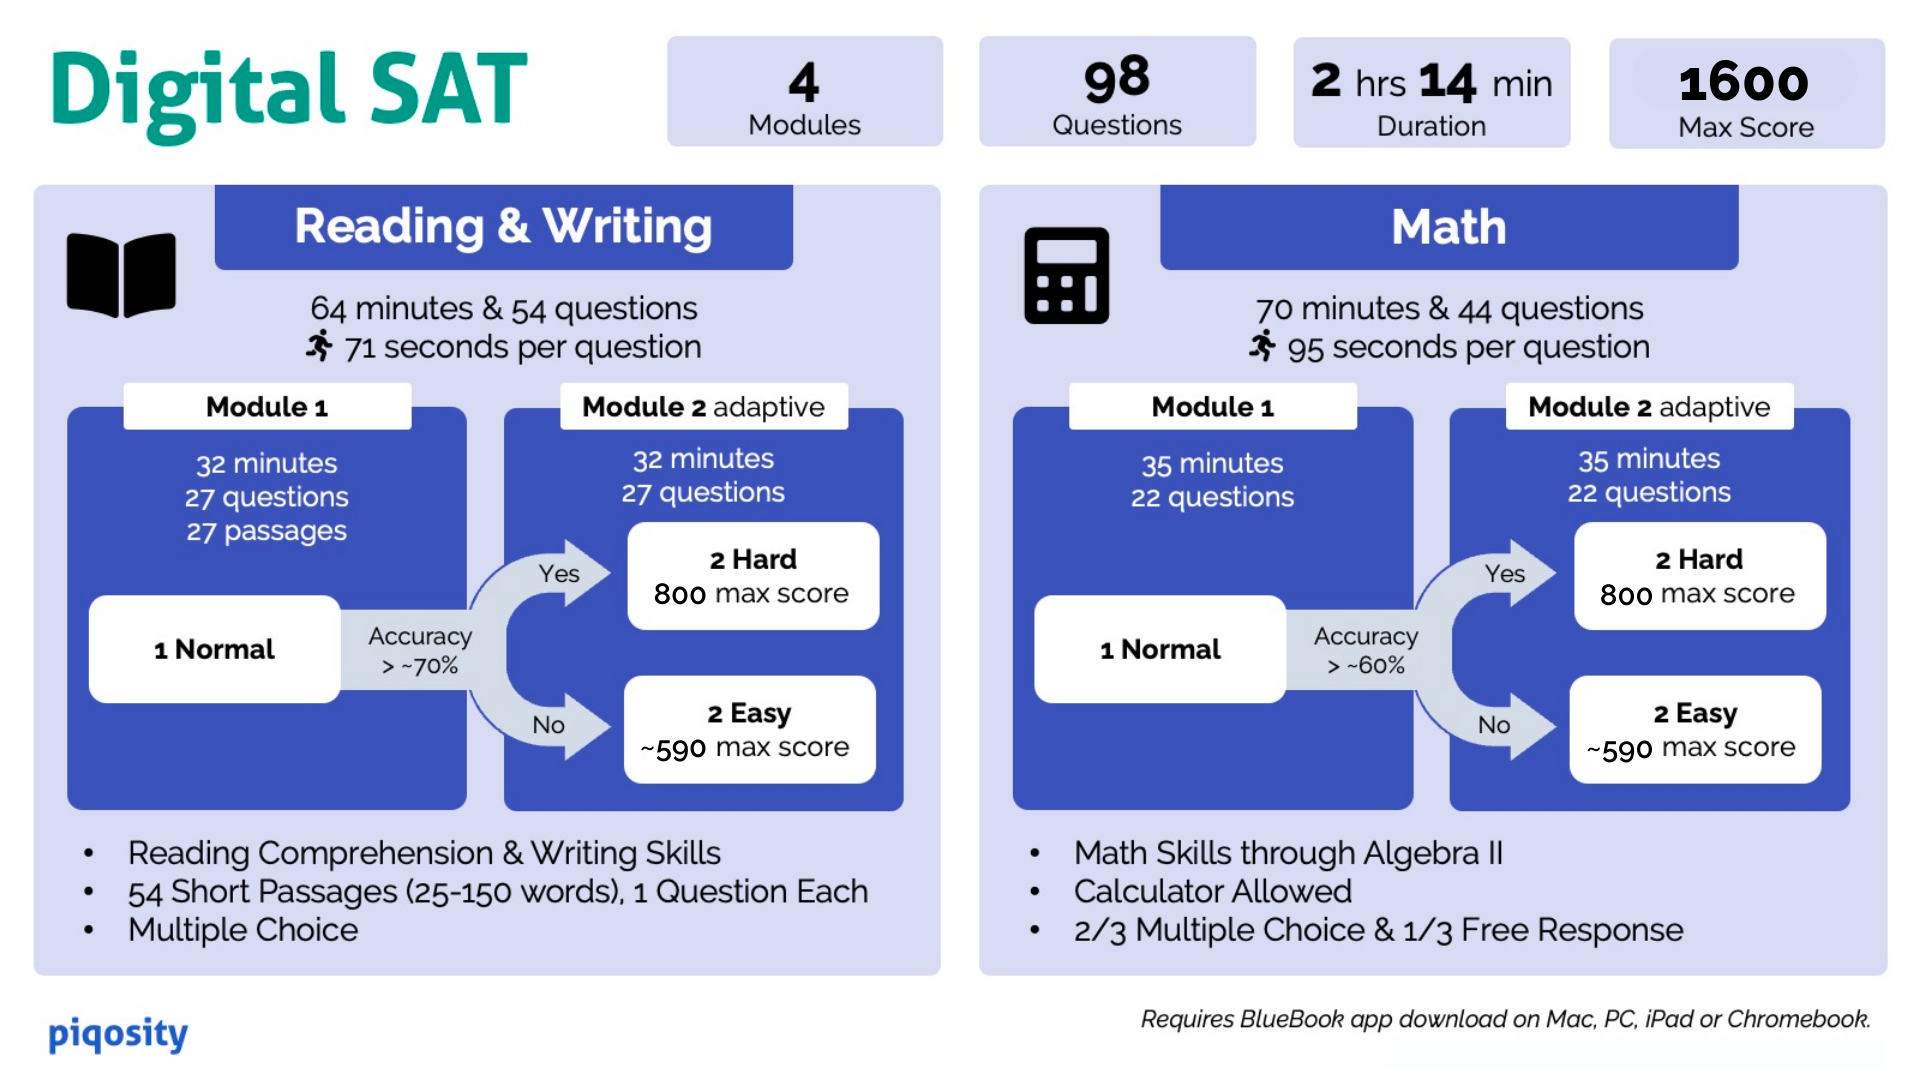 Digital SAT Infographic including format, timing, and strategies.